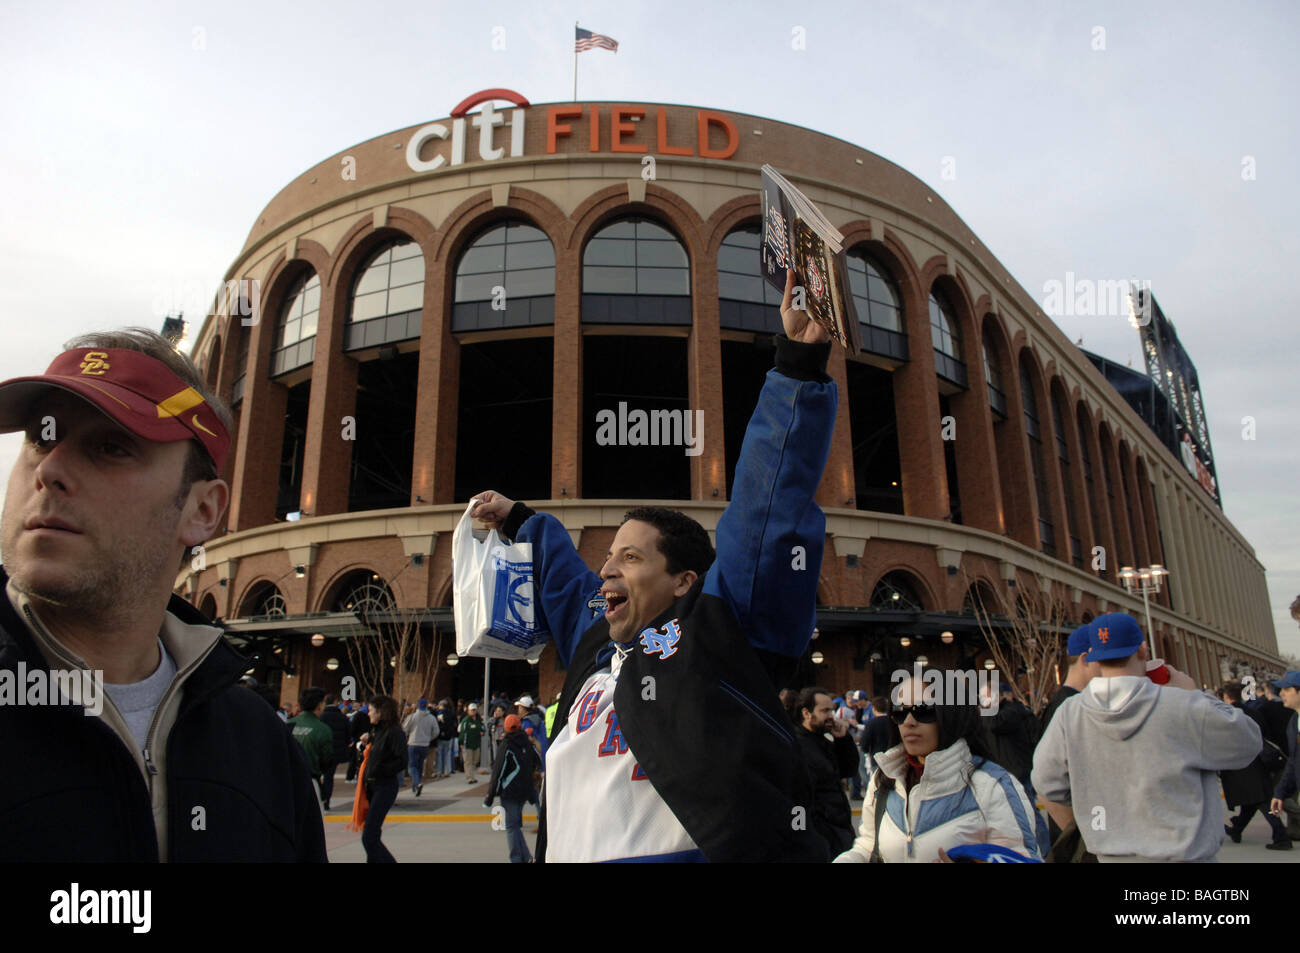 Fans arrive at CitiField in Flushing Queens in New York Stock Photo